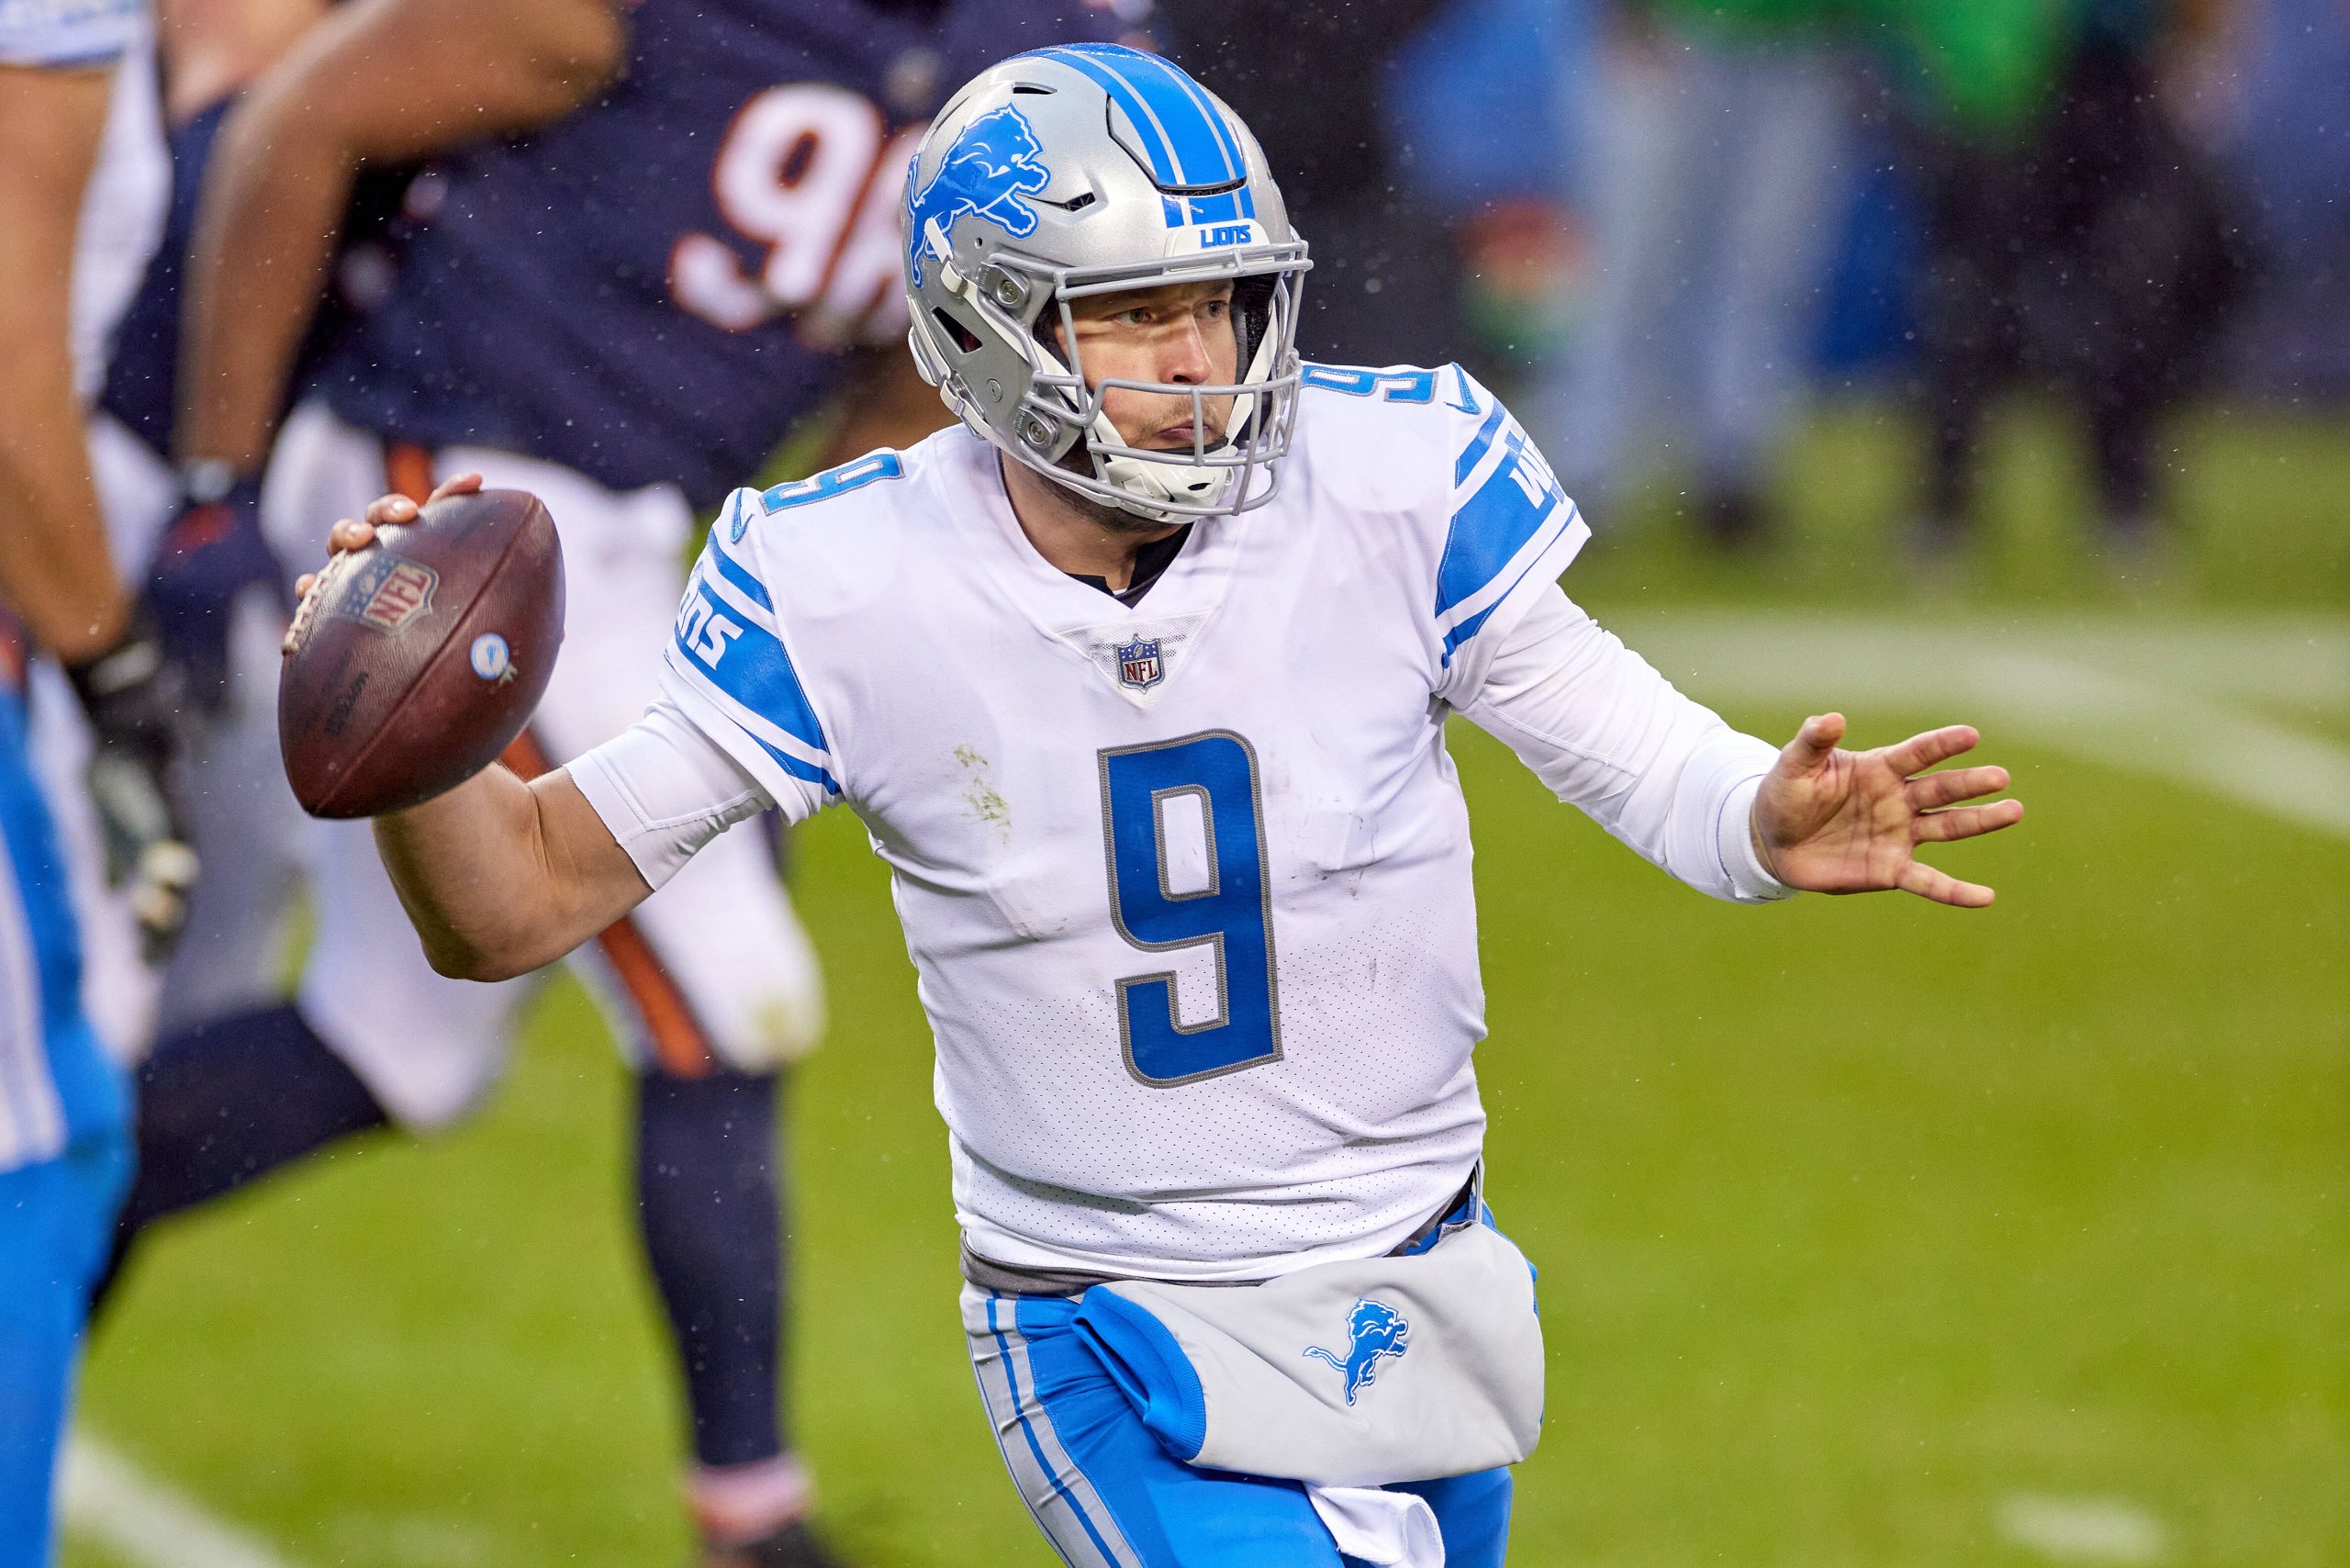 CHICAGO, IL - DECEMBER 06: Detroit Lions quarterback Matthew Stafford (9) throws the football in action during a game be